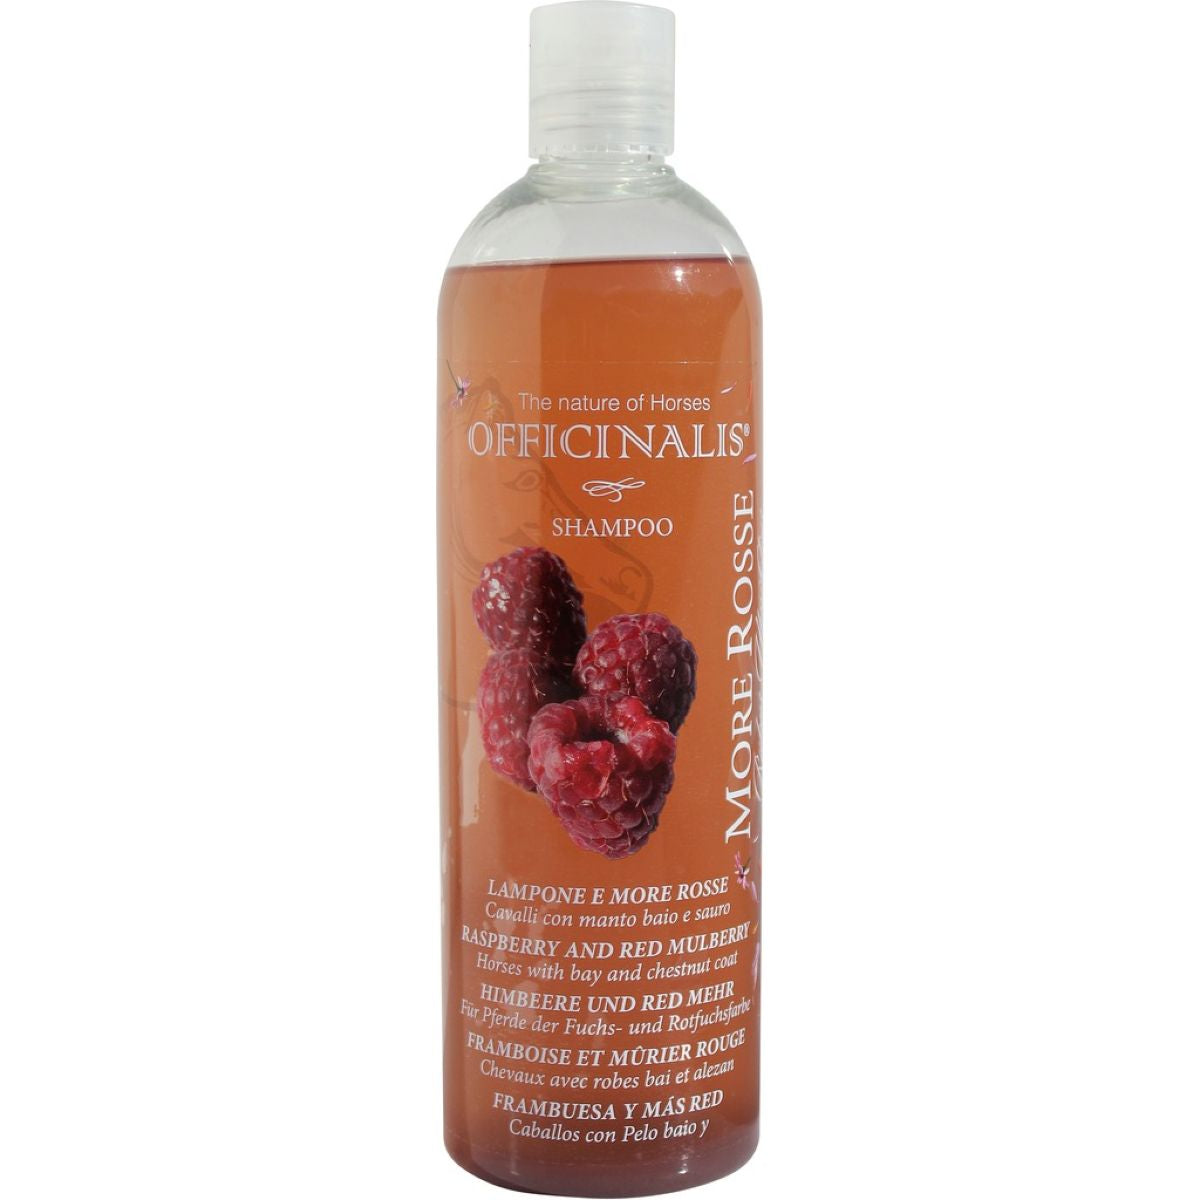 Officinalis Shampoo Rapsberry & Red Mulberry